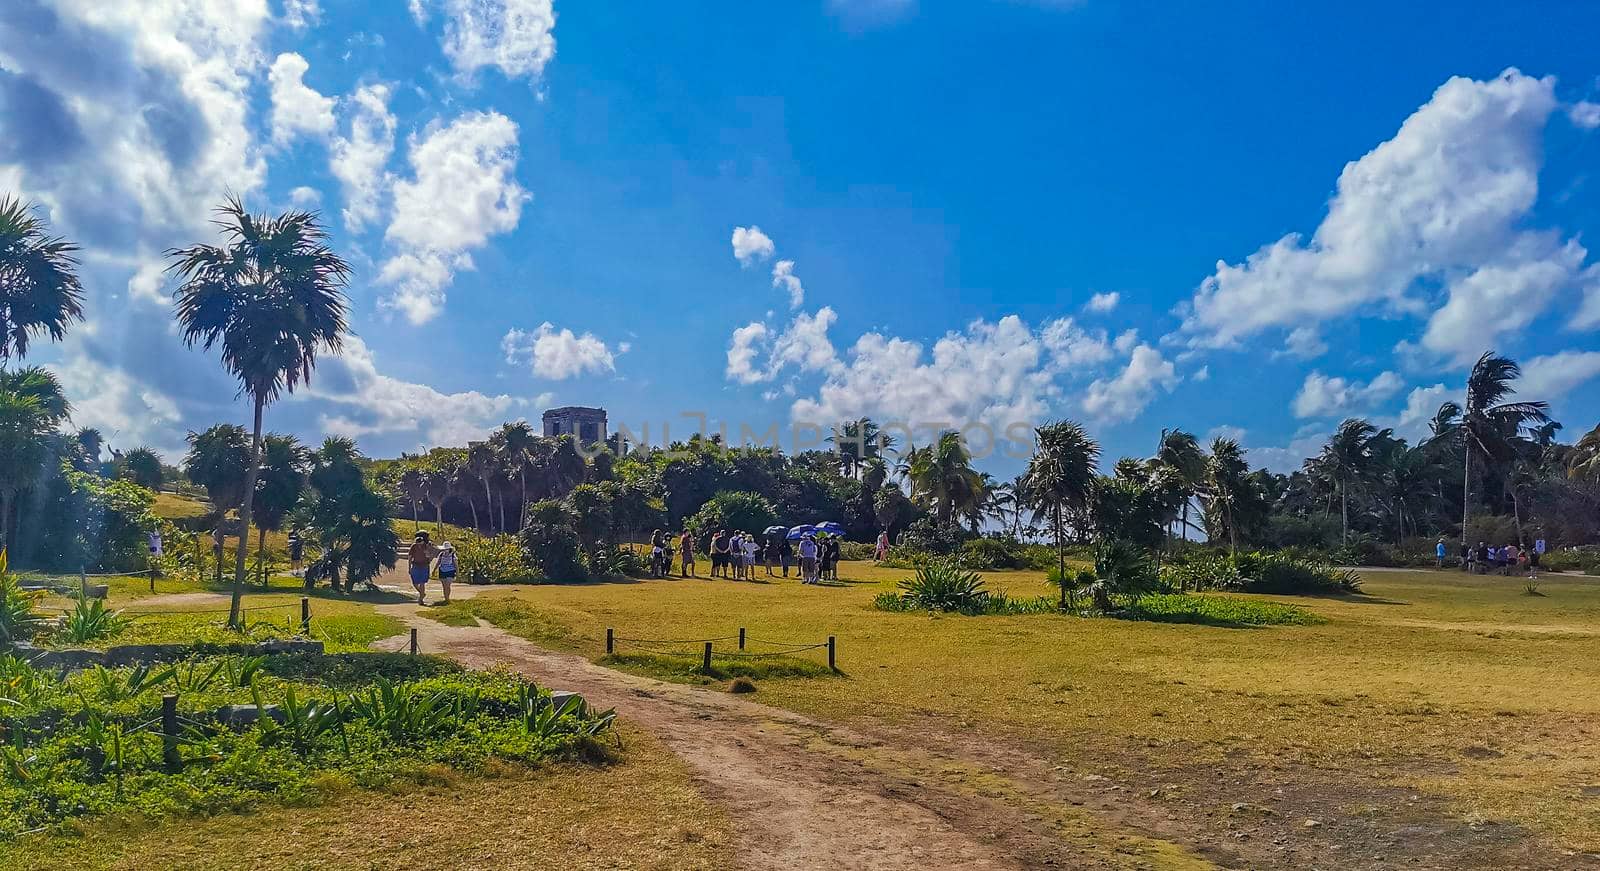 Tulum Mexico 21. February 2022 Ancient Tulum ruins Mayan site with temple ruins pyramids and artifacts in the tropical natural jungle forest palm and seascape panorama view in Tulum Mexico.